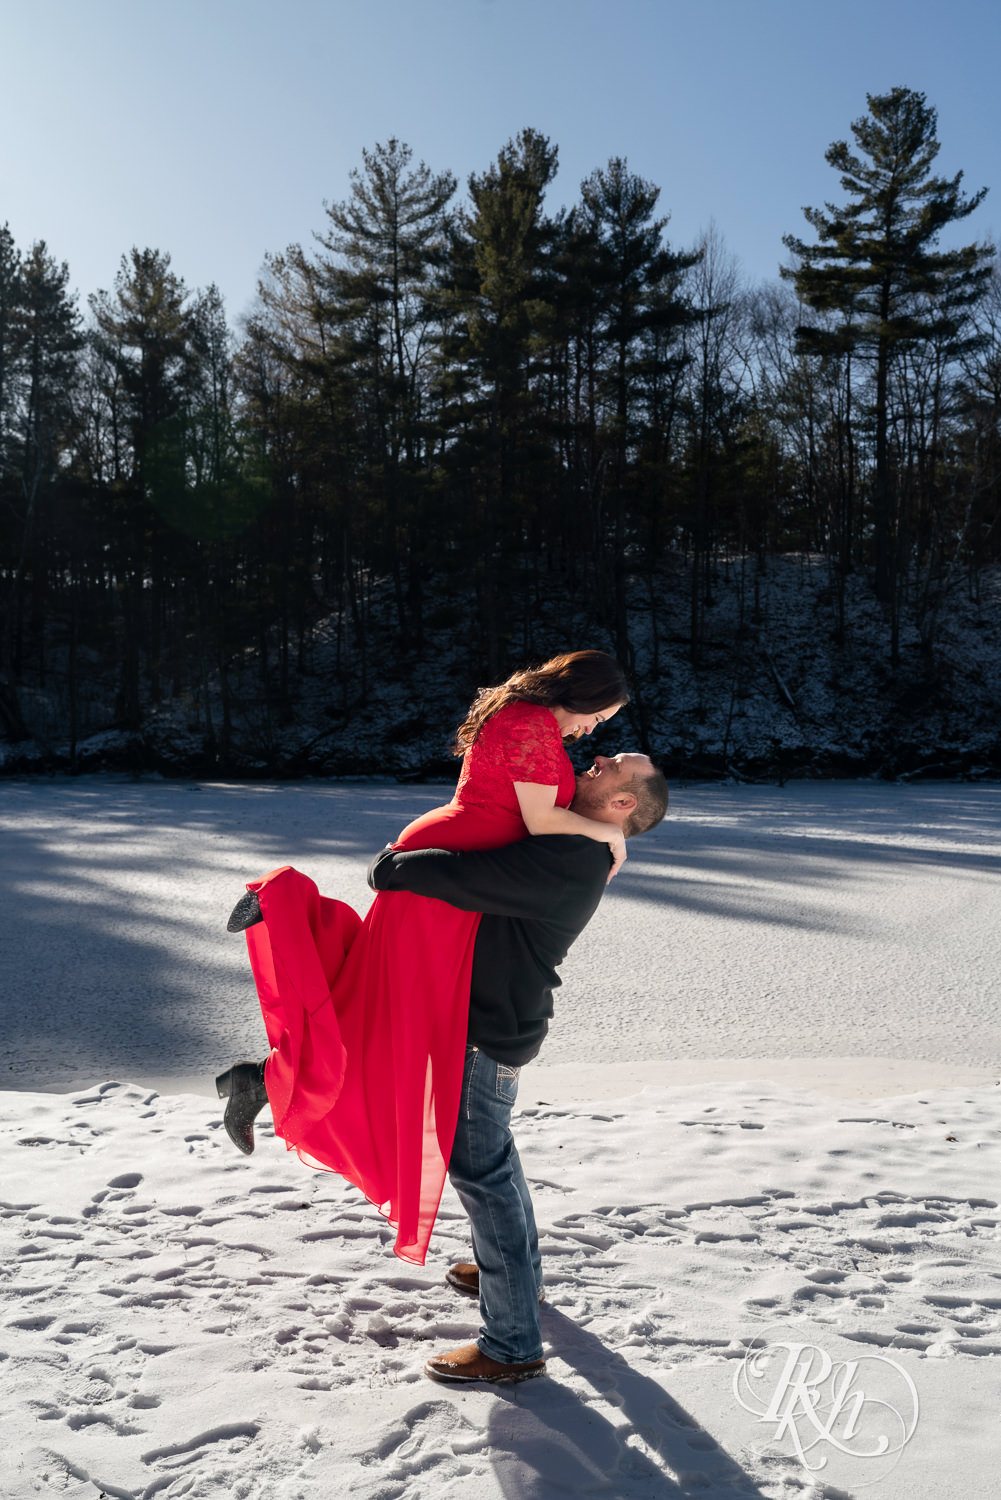 Man in jeans lifts woman in red dress in the snow during winter engagement photography in Pine City, Minnesota.